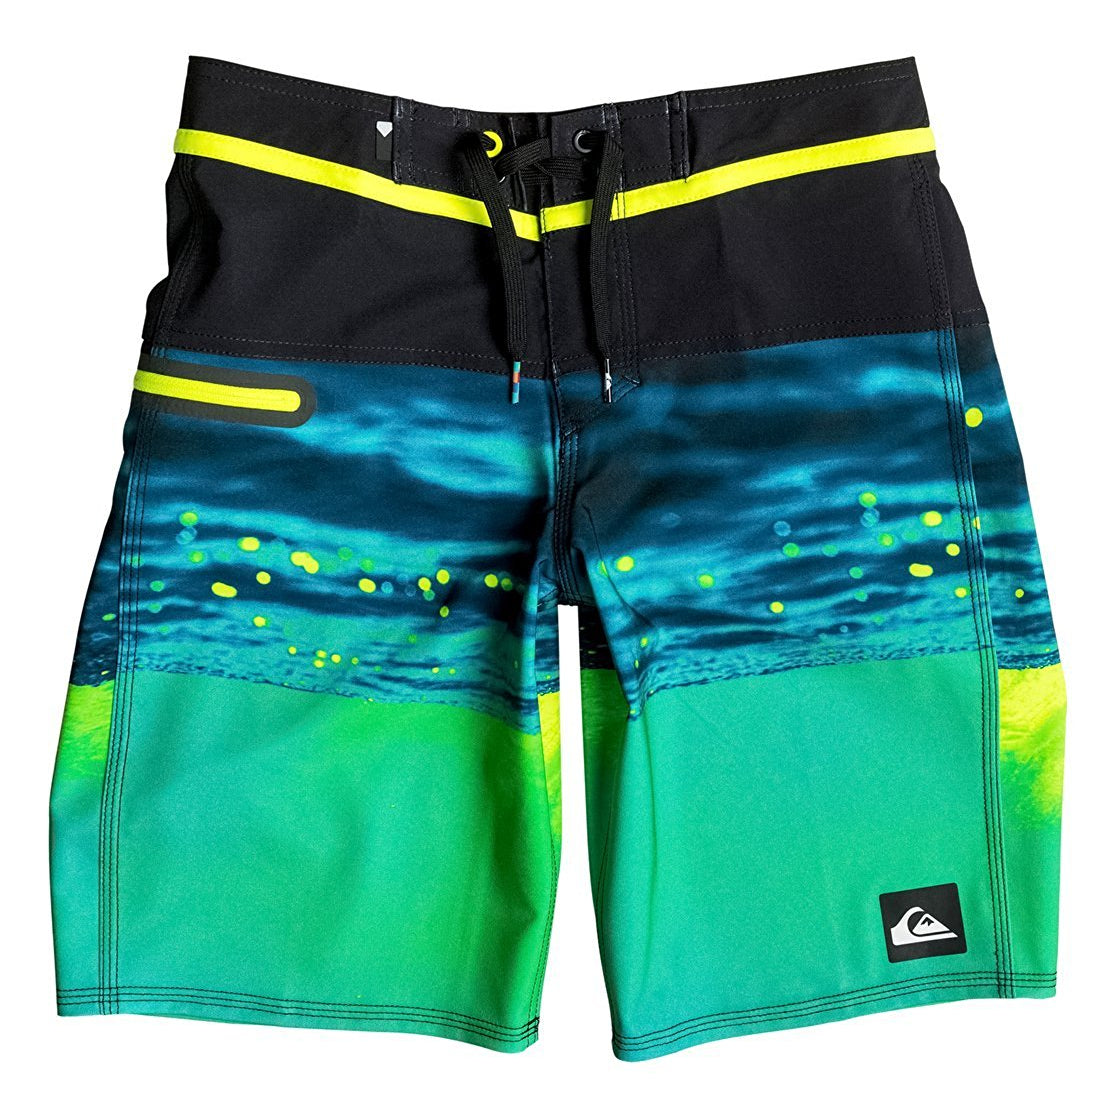 Quiksilver Hold Down Vee Youth Boardshort YHJ6 23